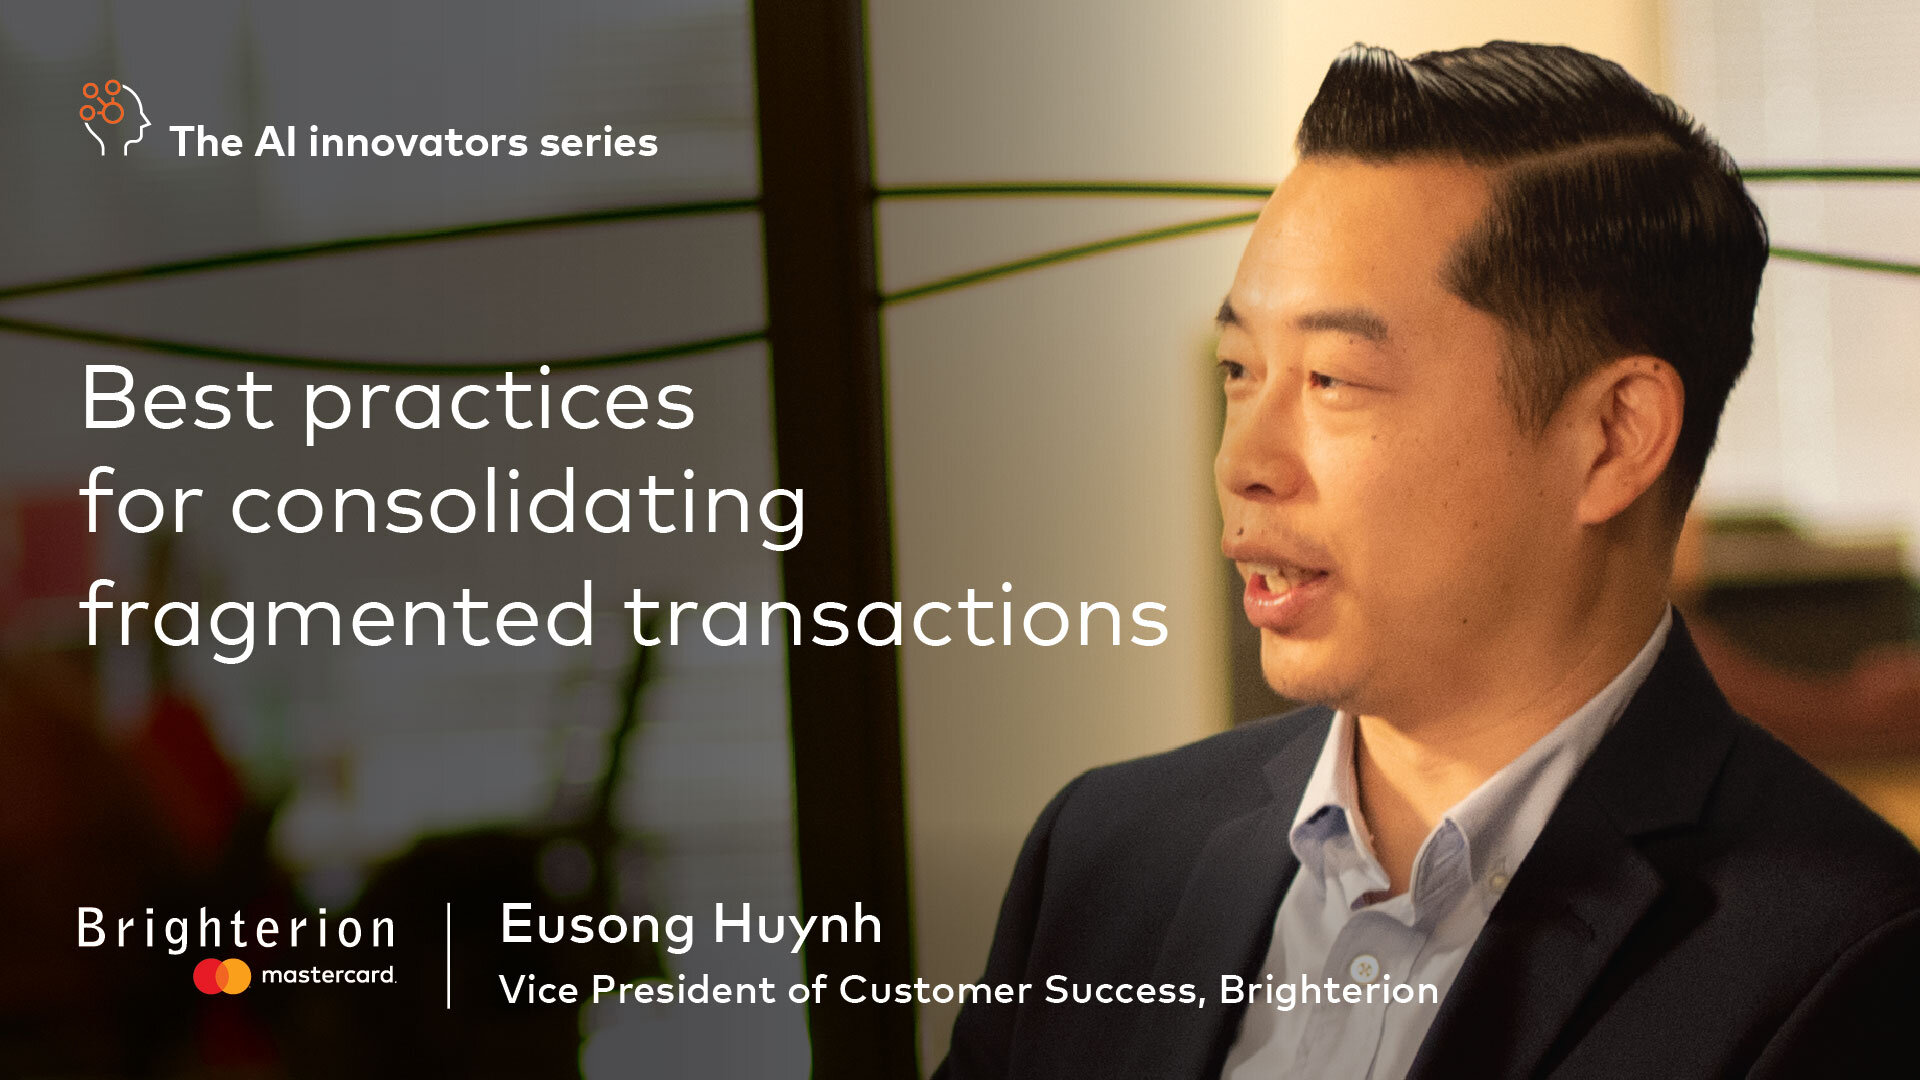 Best practices for consolidating fragmented transactions